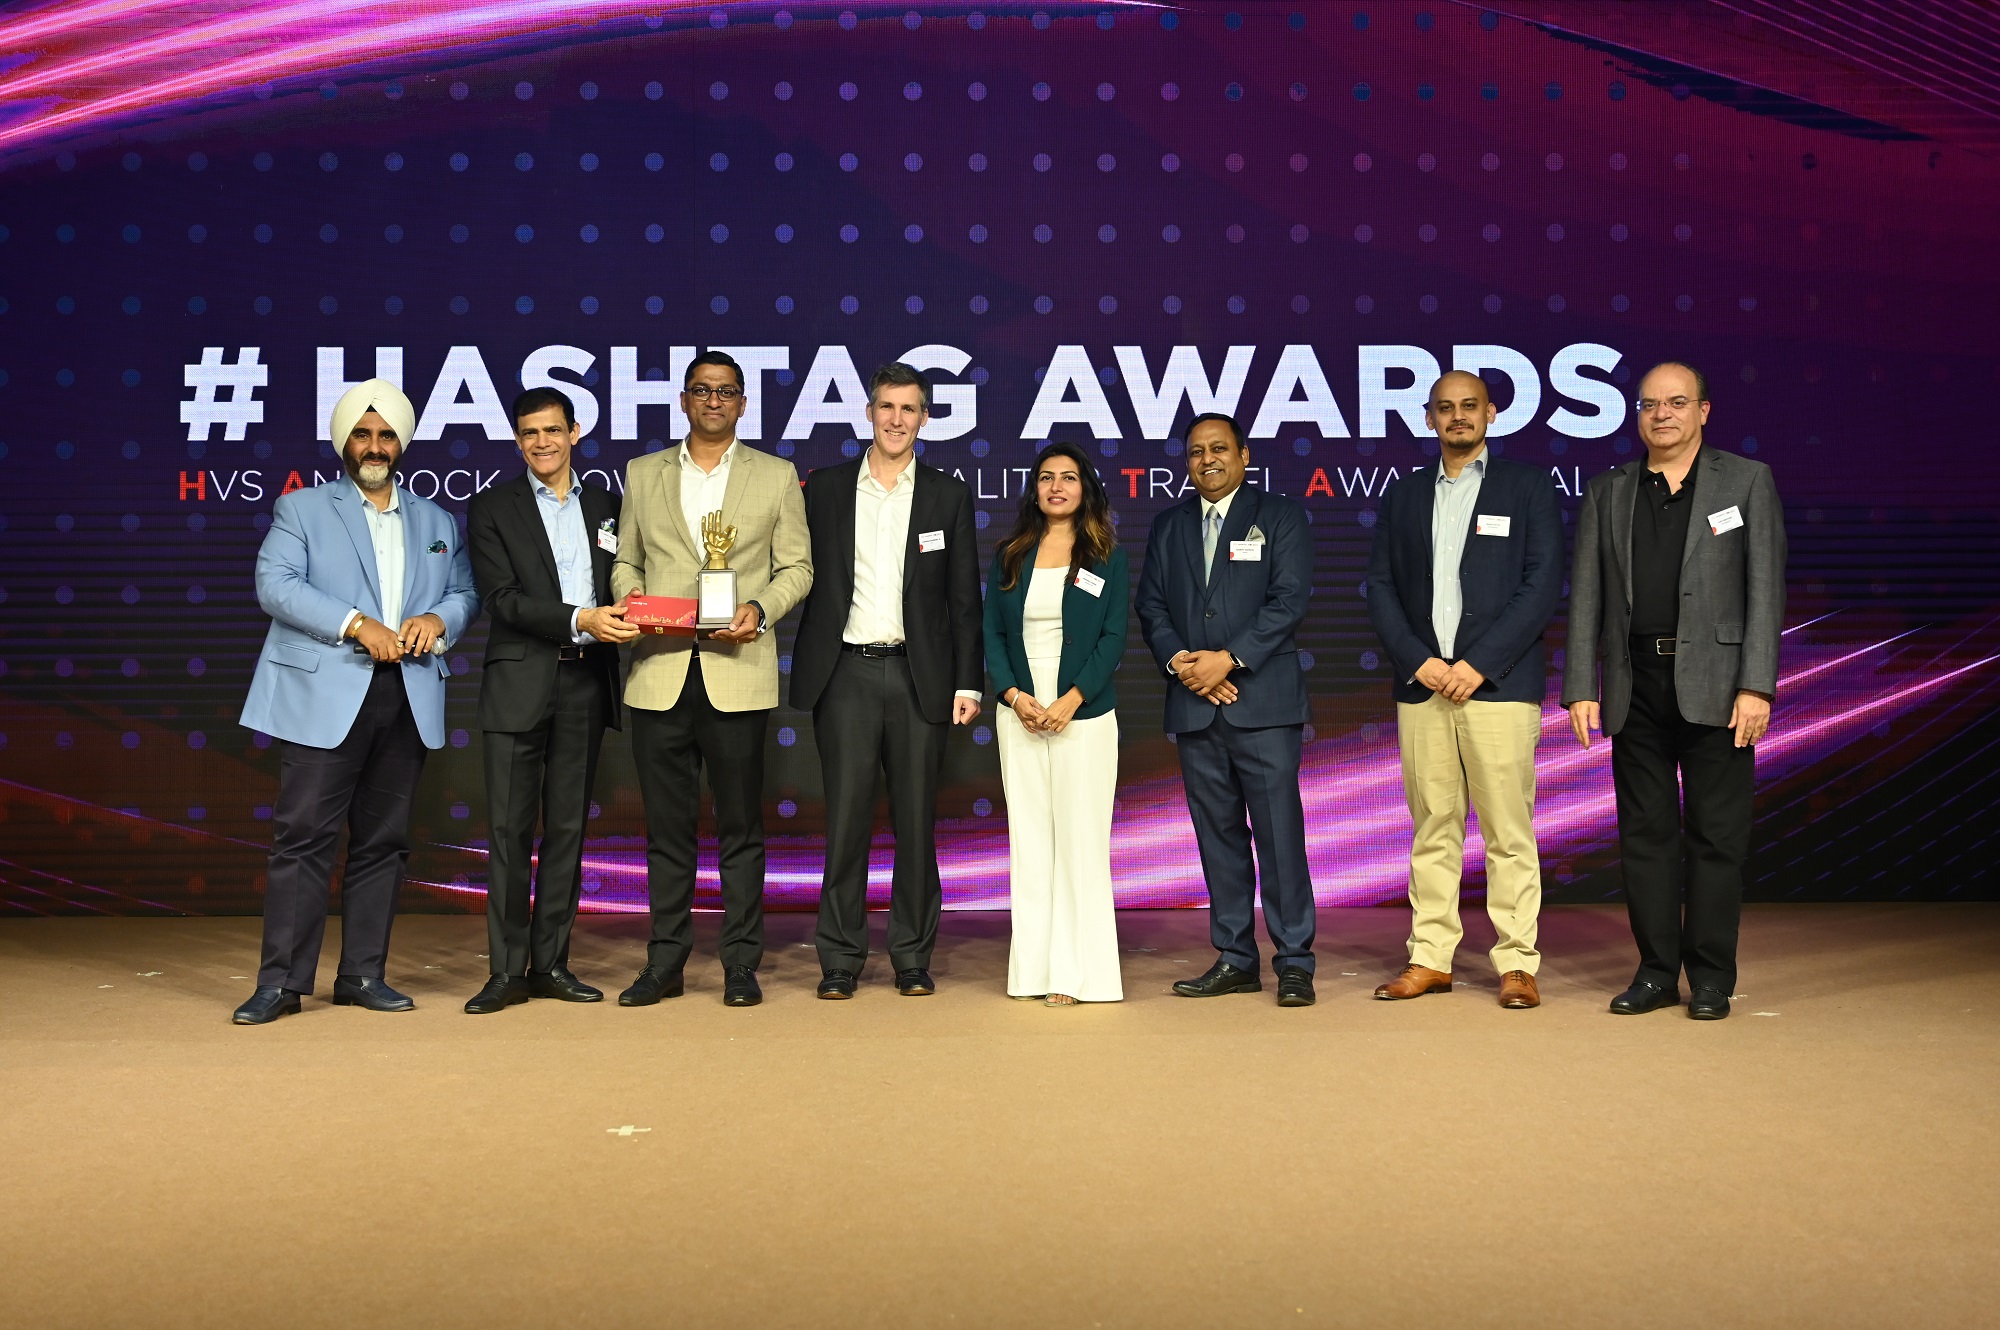 #HASHTAG Awards honoured the best performing Hotels and General Managers